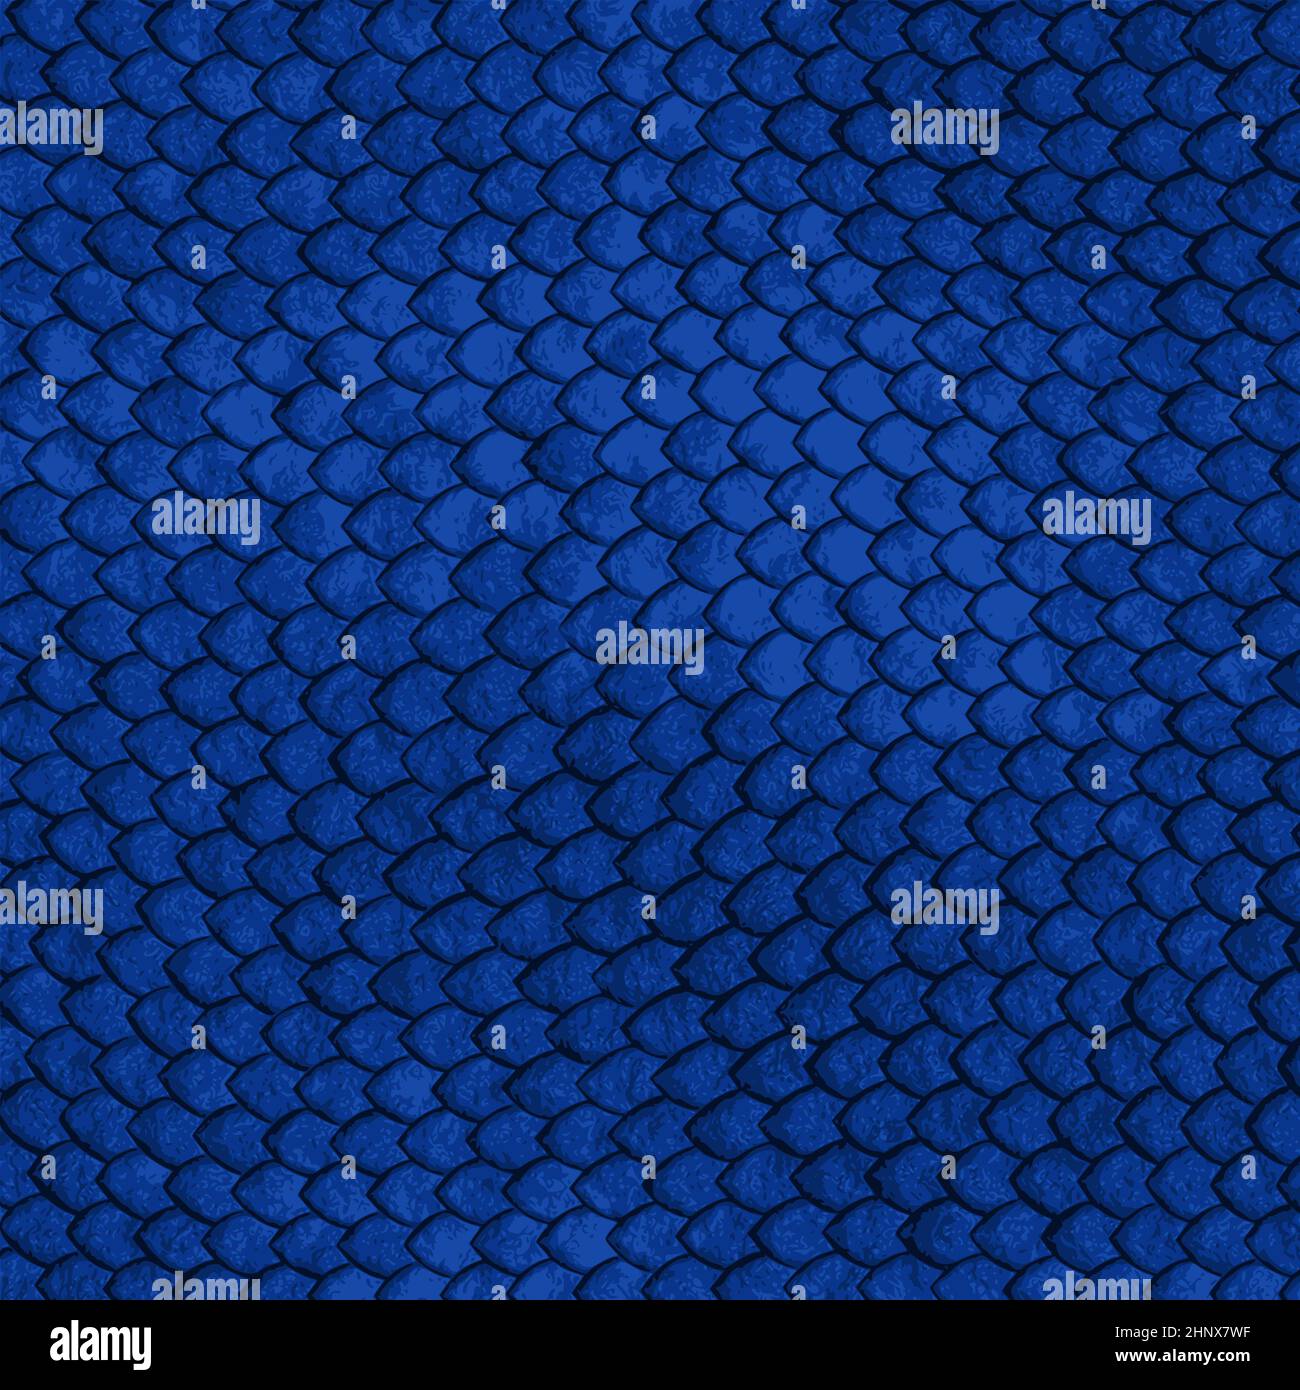 Abstract blue dragon background. Vector image texture Stock Photo - Alamy